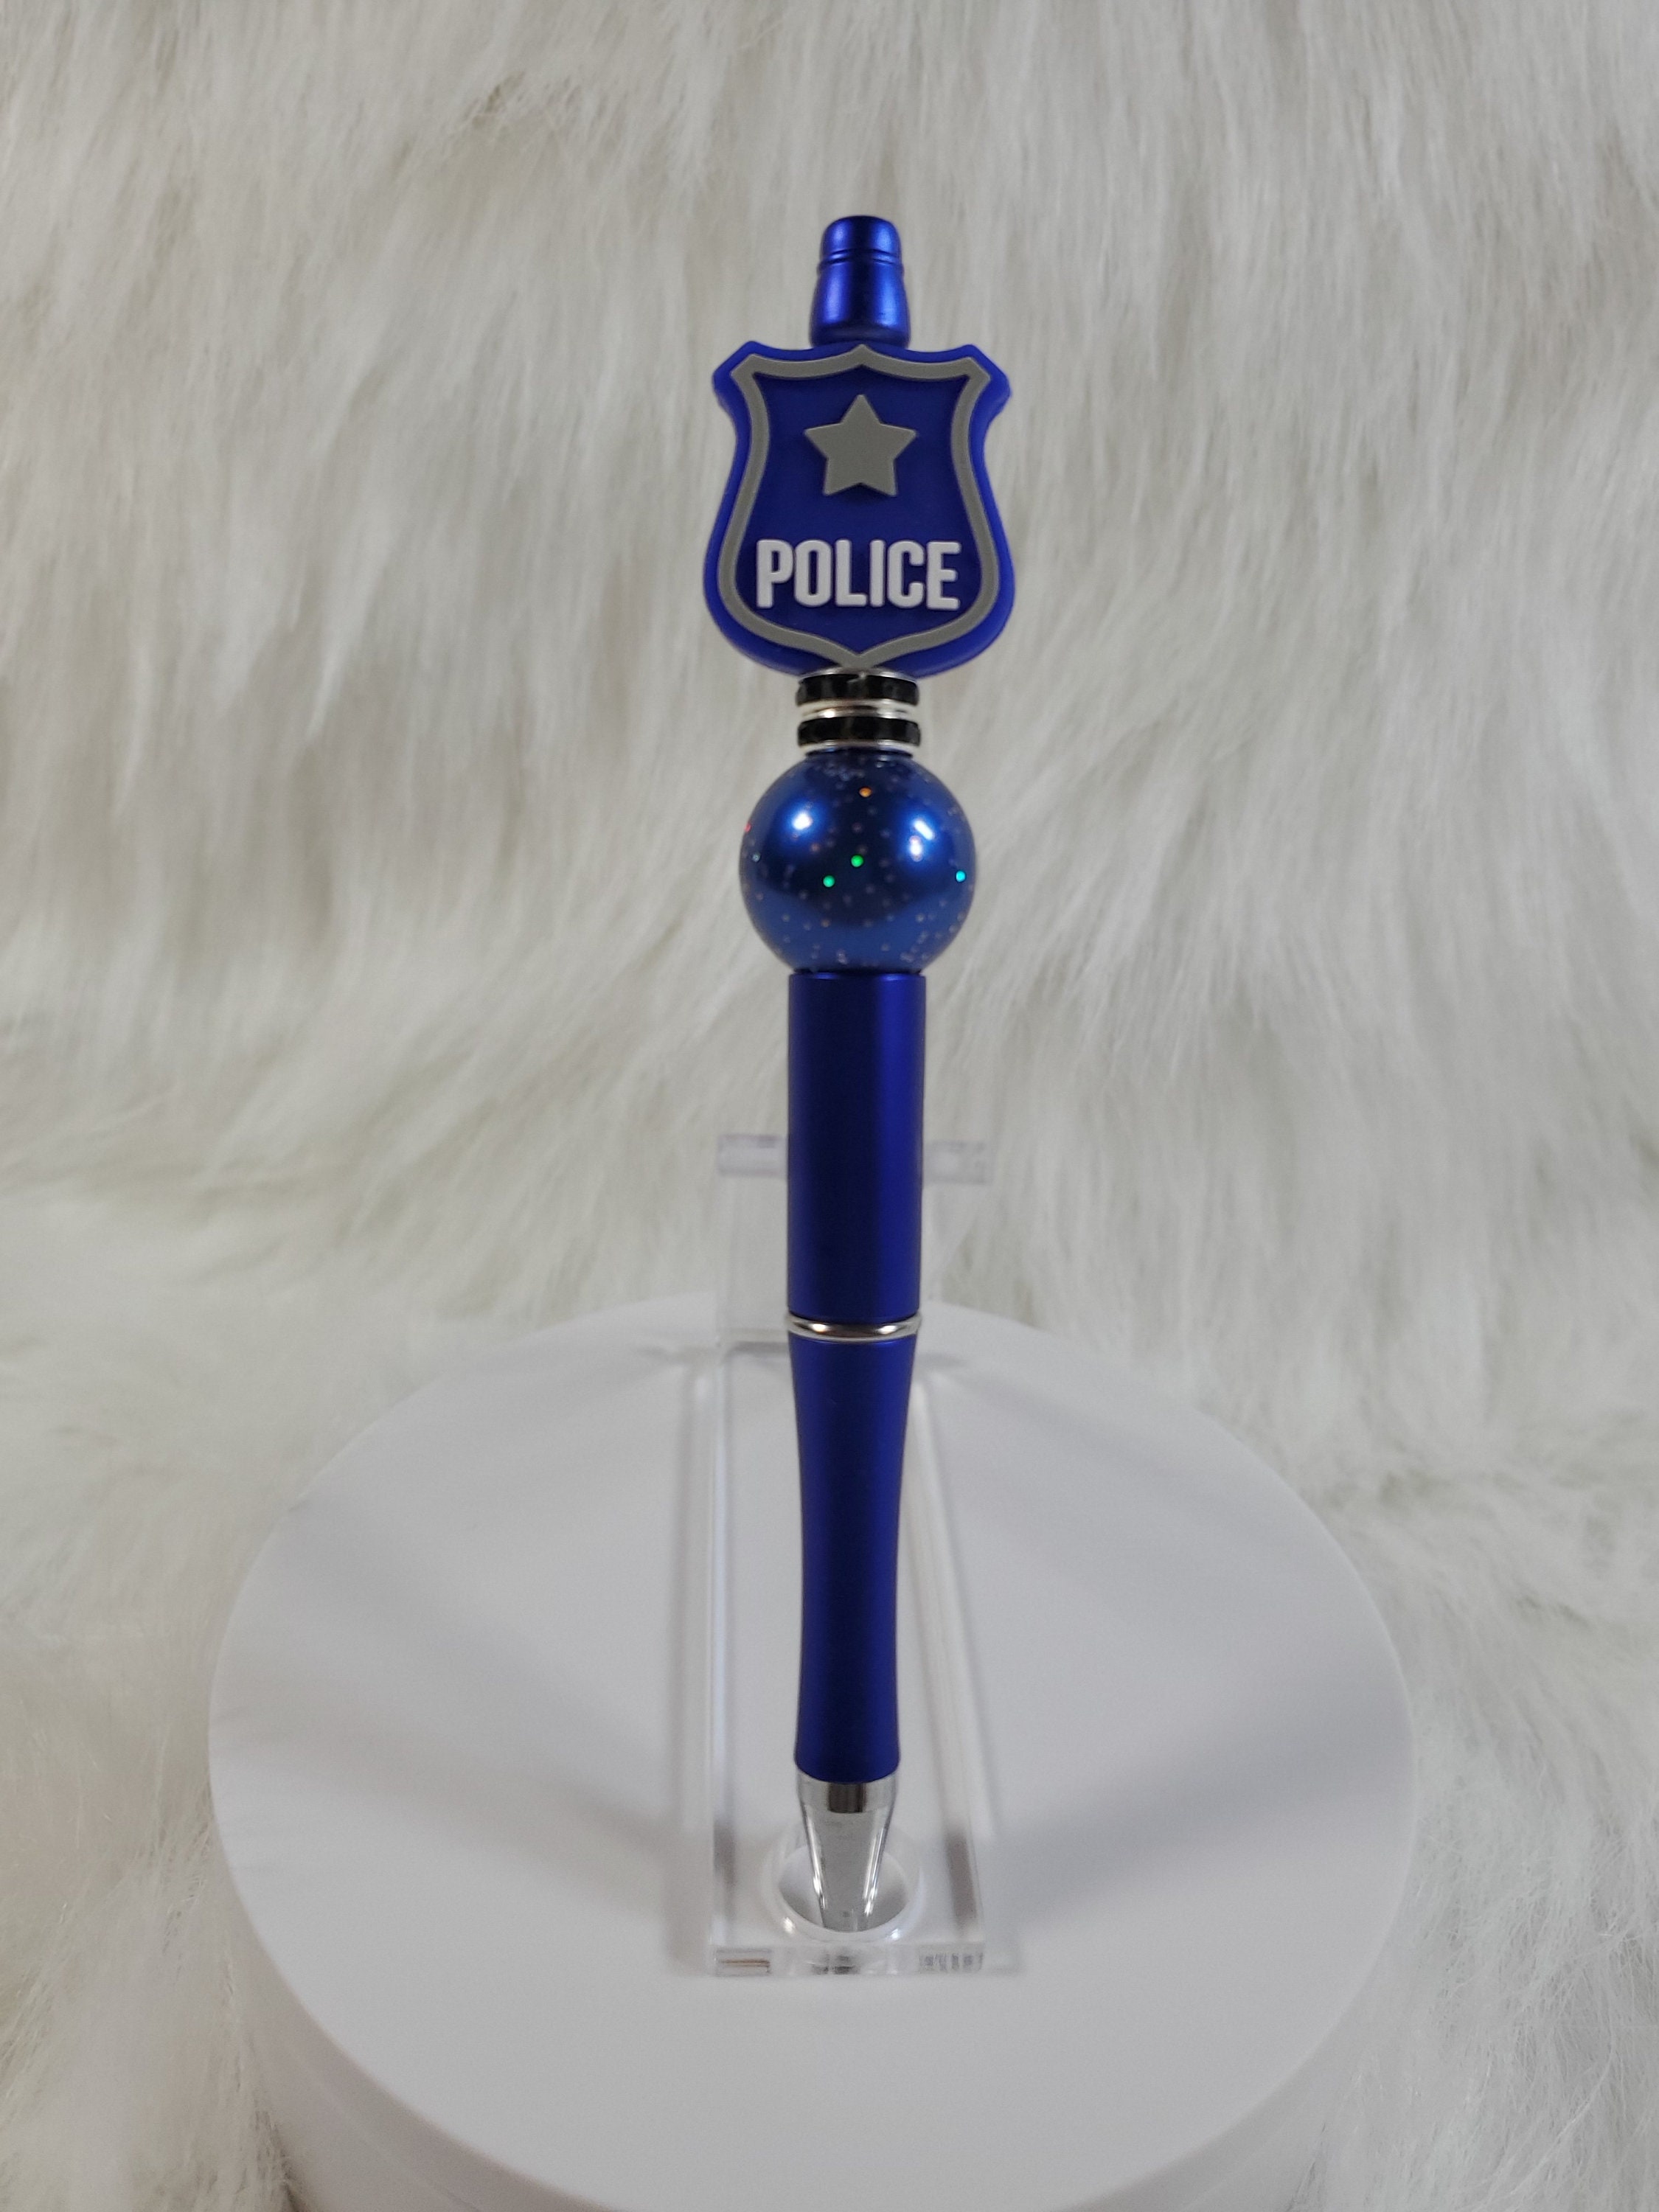 Beaded Police Badge Ballpoint Pen w/ Coordinating Silicone Beads